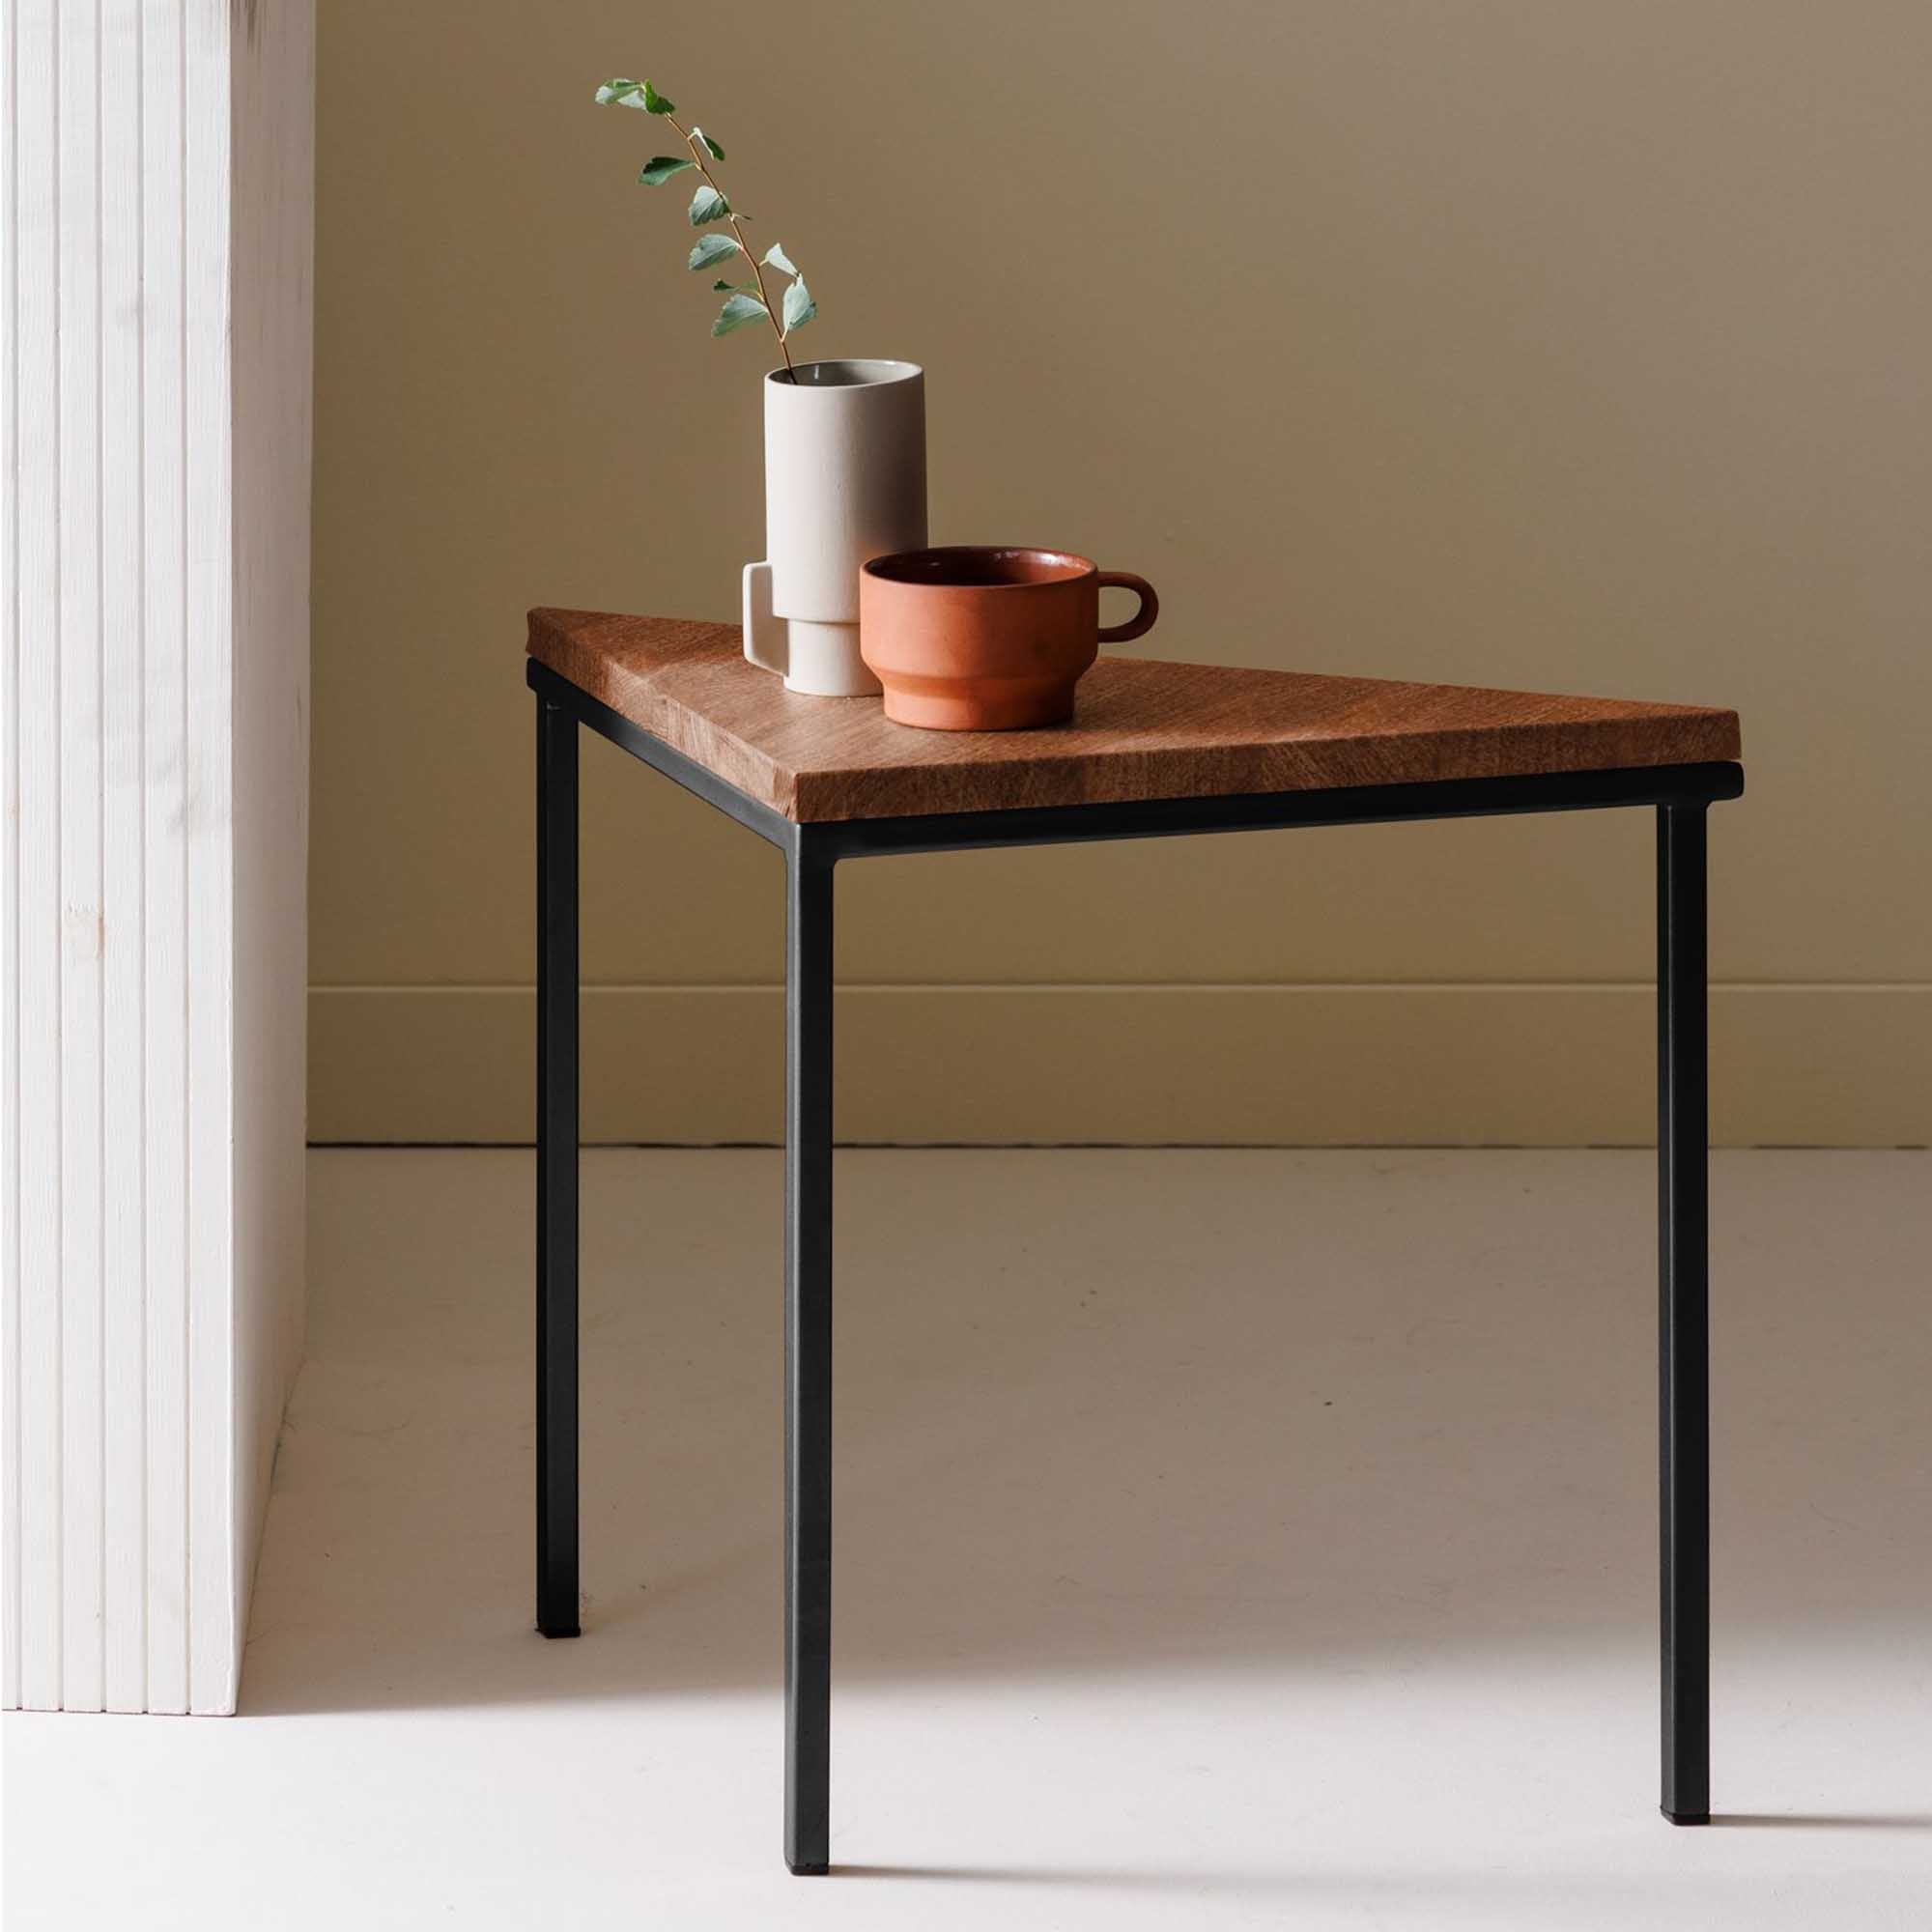 Tripod Table, Beech Wood, Walnut Colour black frame, interior side view with vase and mug